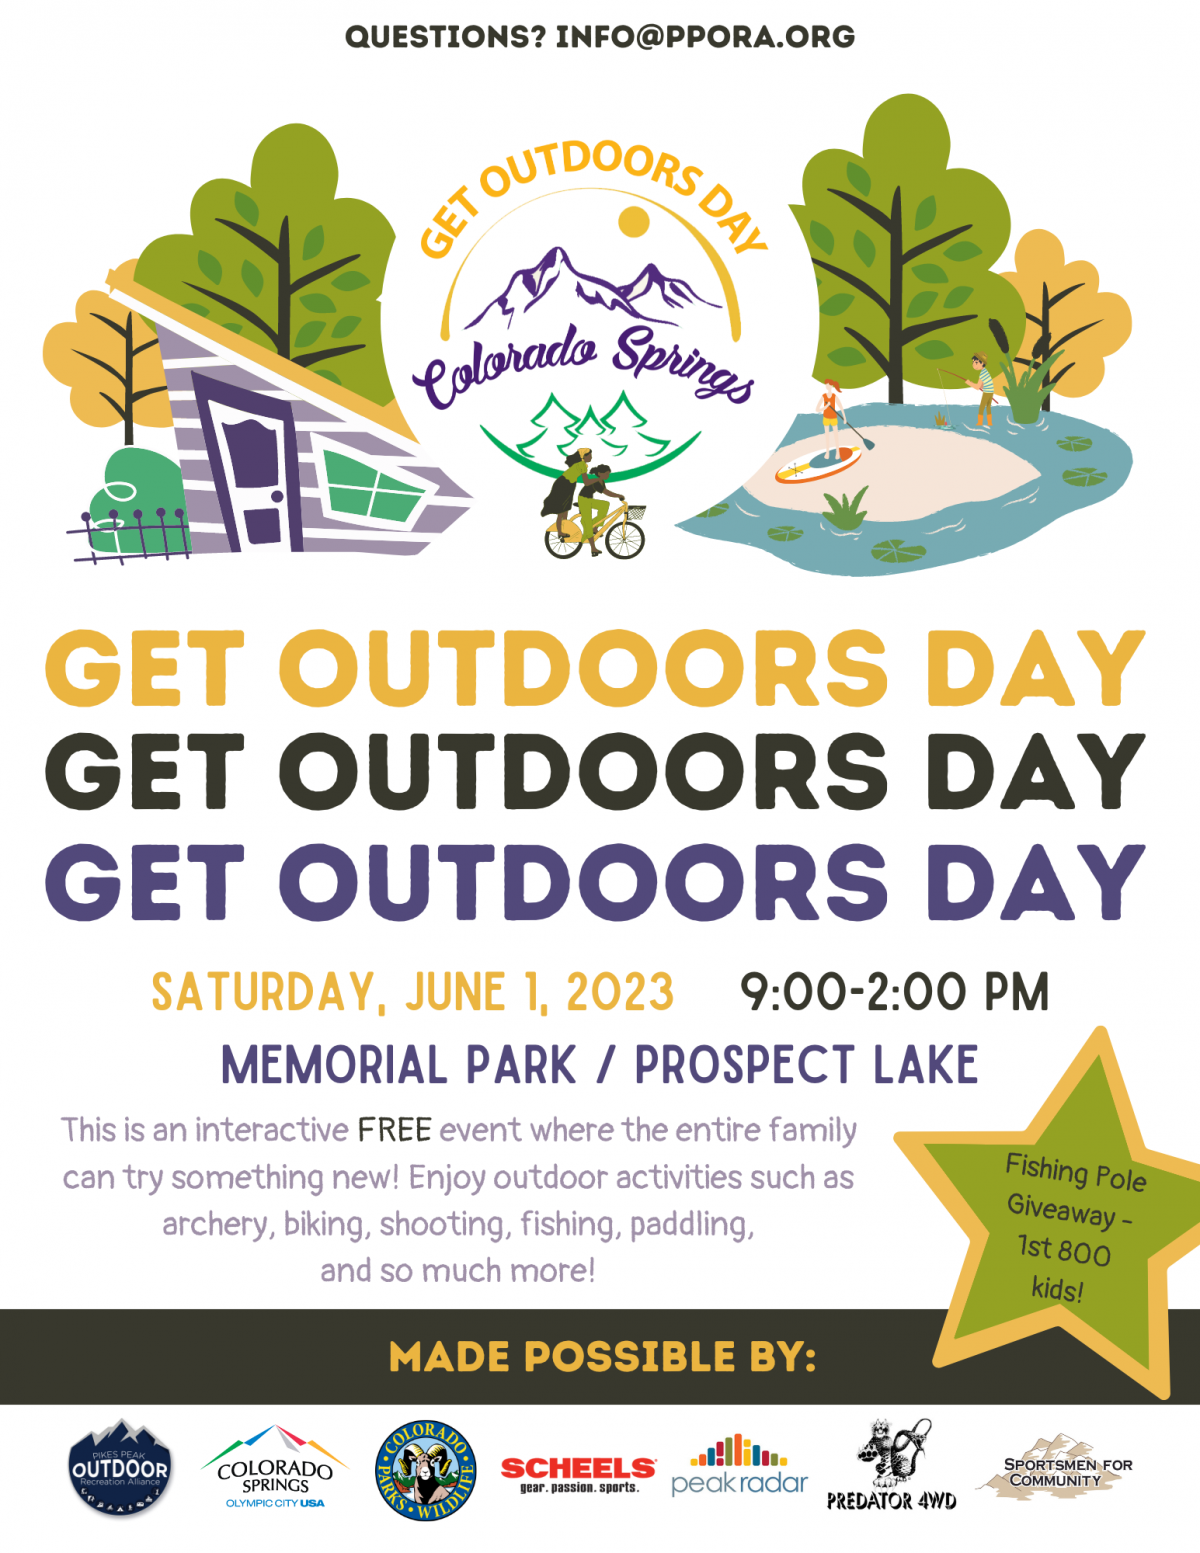 Get Outdoors Day, Pikes Peak Outdoor Recreation Alliance and Colorado Parks and Wildlife: Southeast Region and City of Colorado Springs at Memorial Park, Colorado Springs, Colorado Springs CO, Sports & Outdoors [Video]